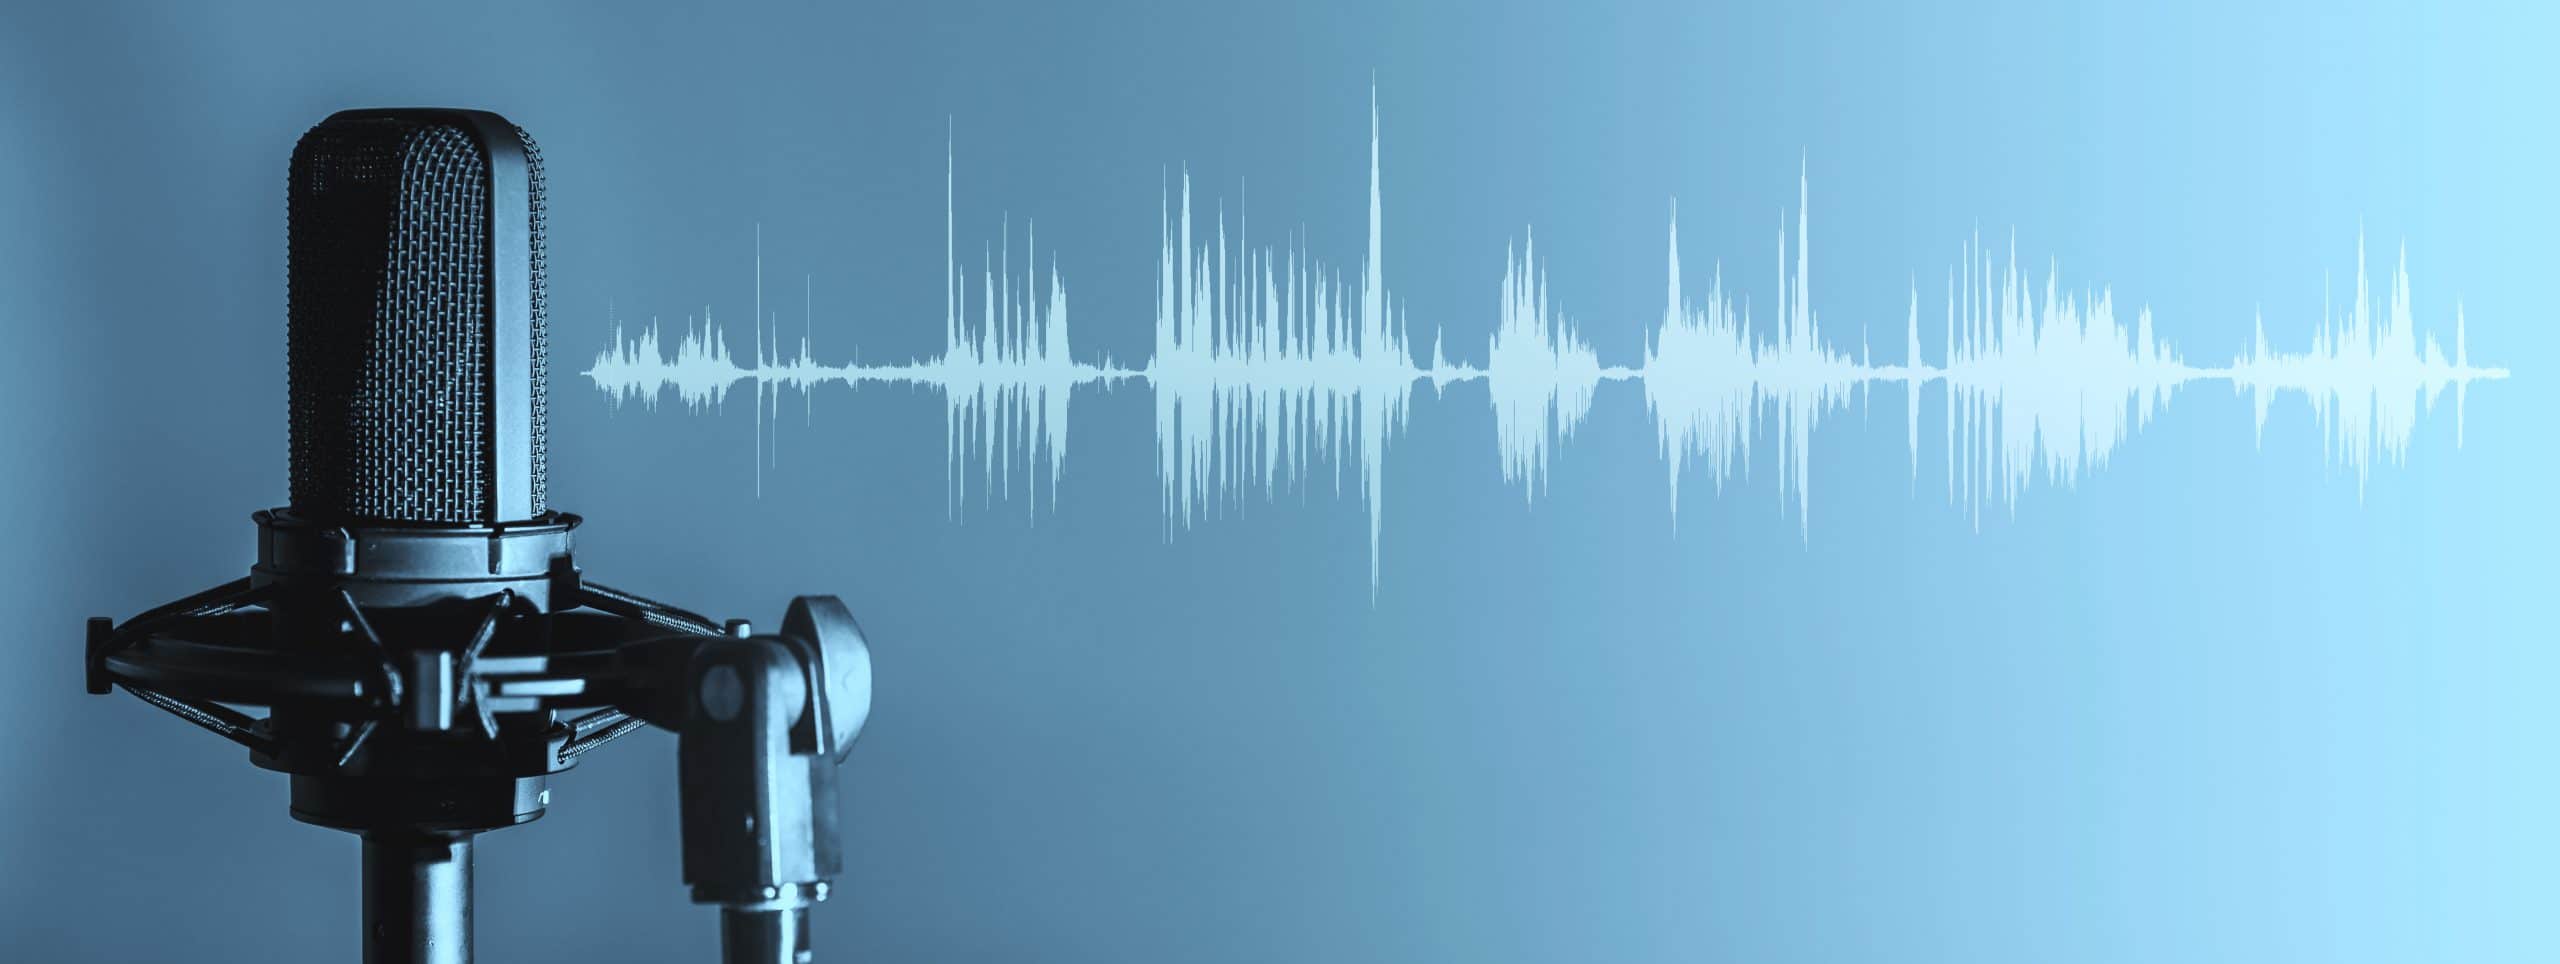 Microphone with waveform on blue background, broadcasting or podcasting banner